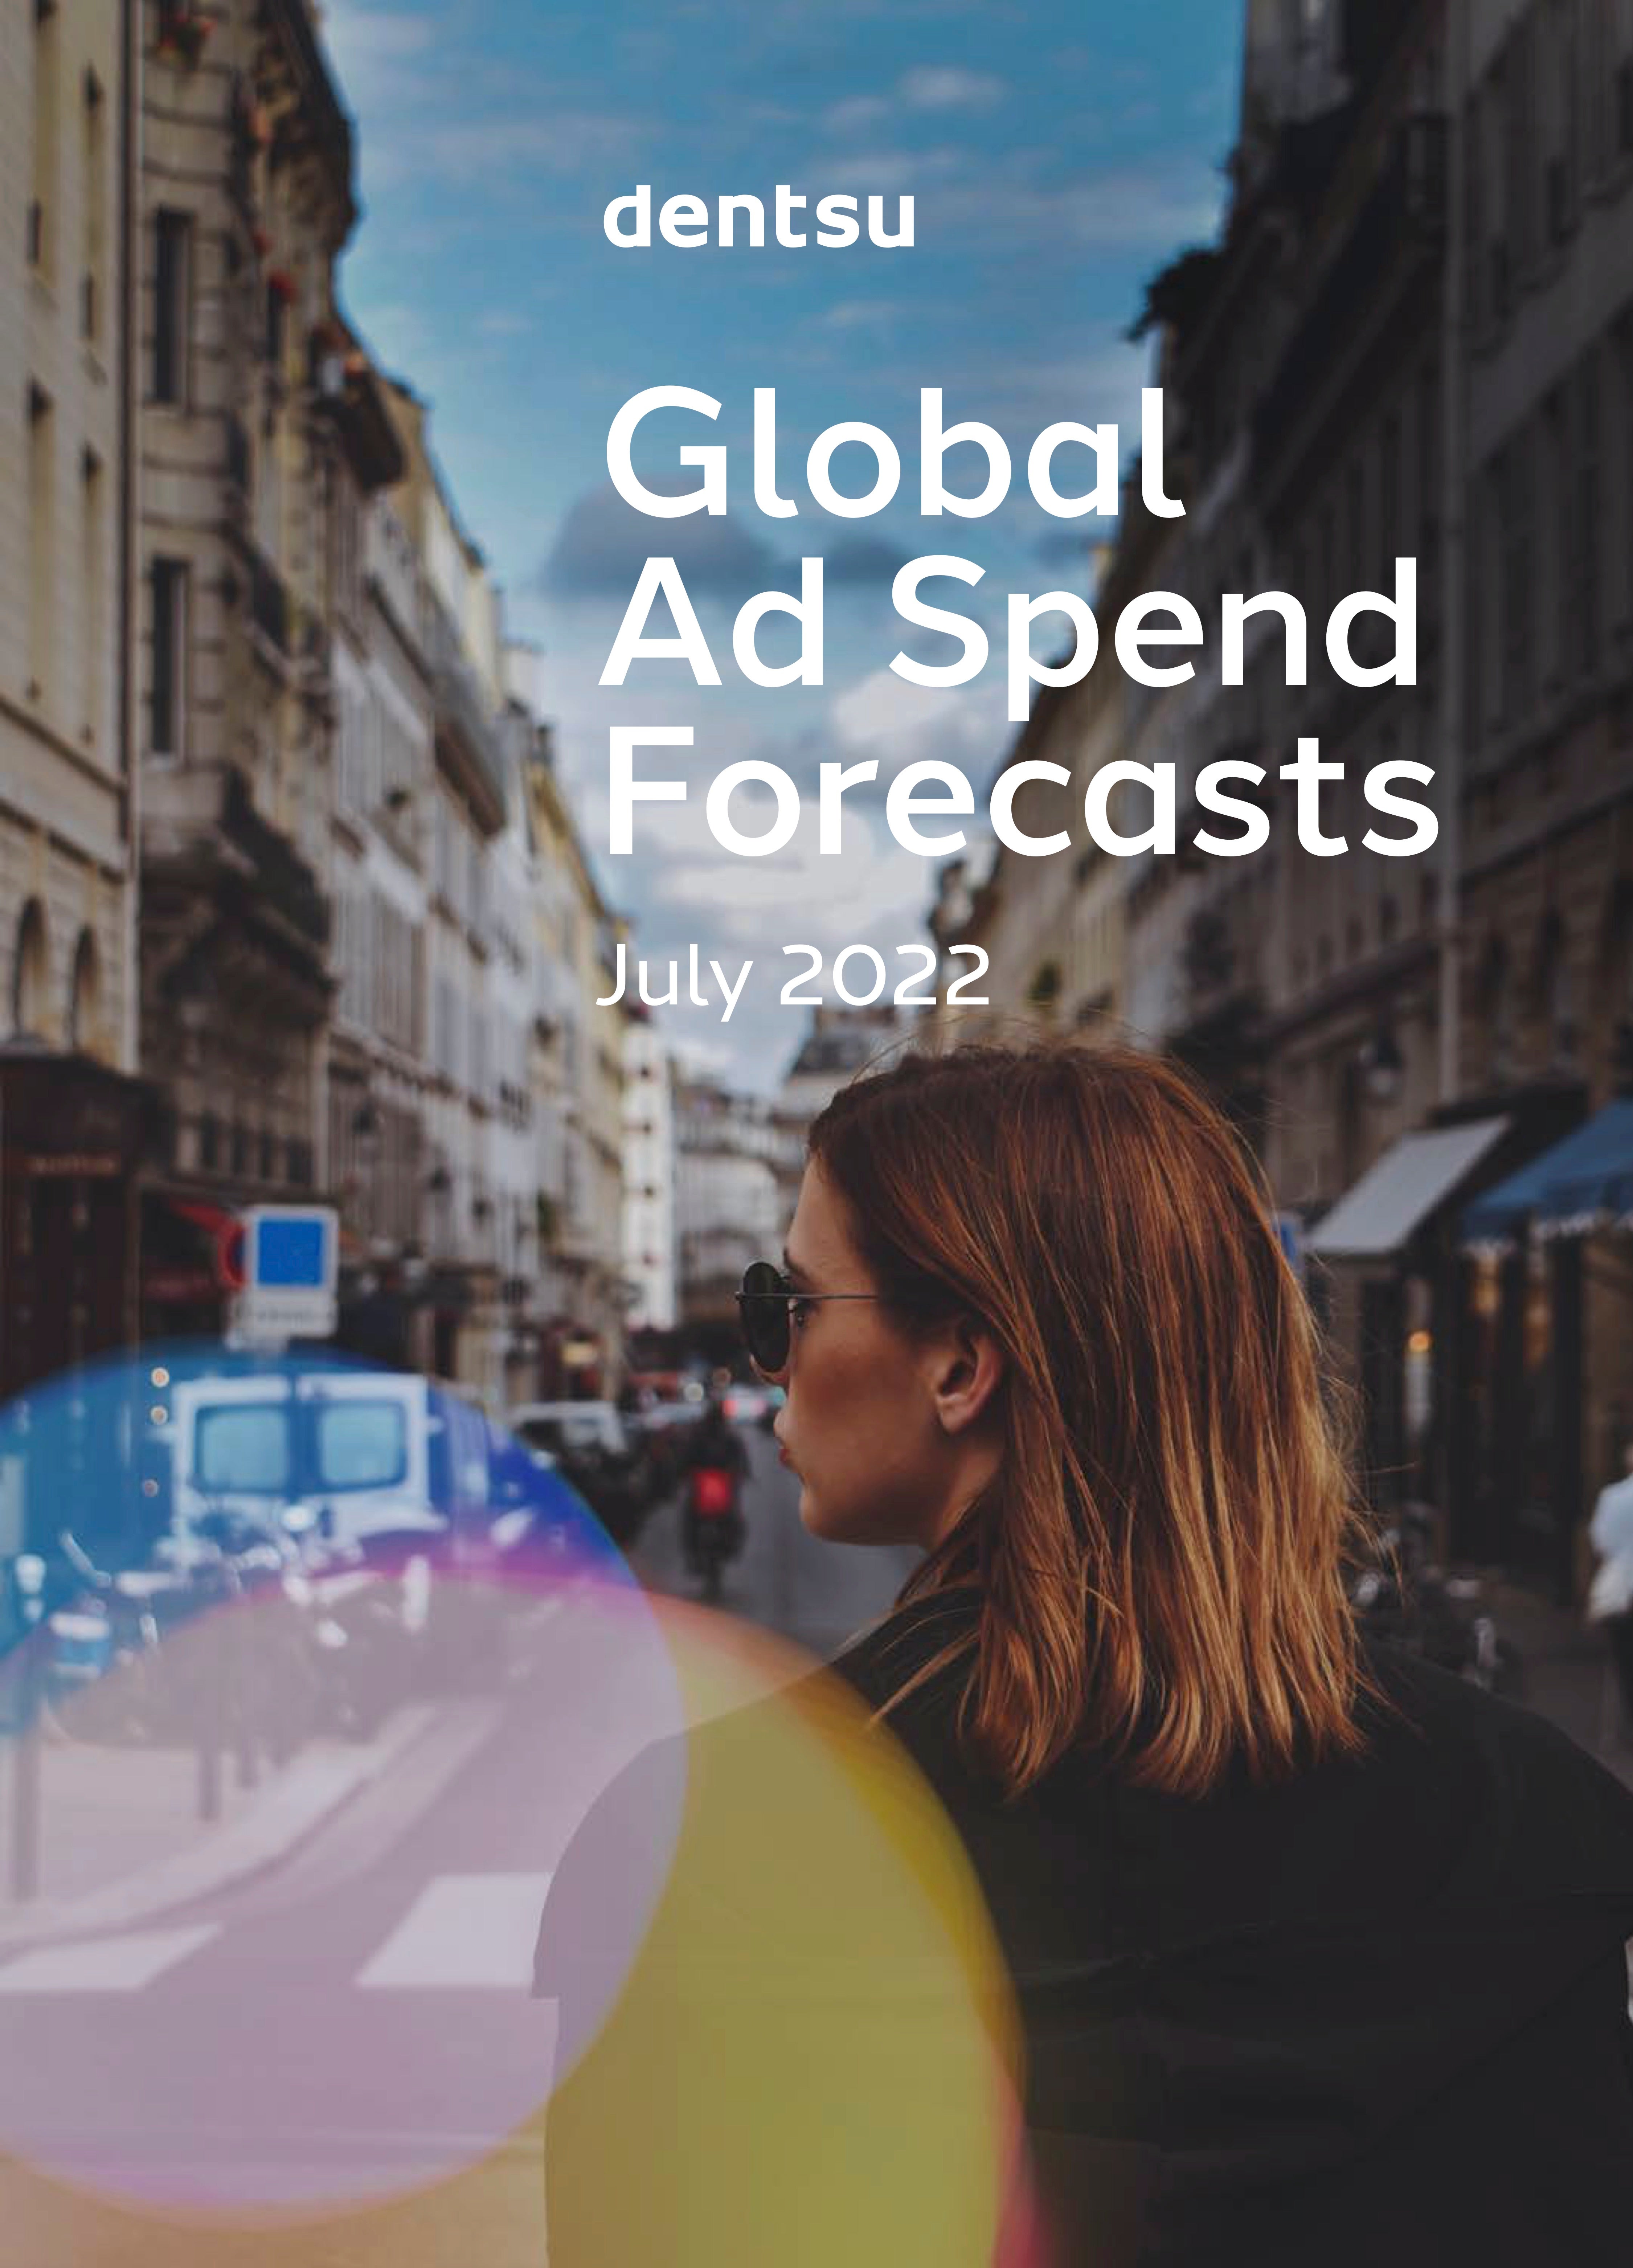 Global Ad Spend Forecast - July 2022